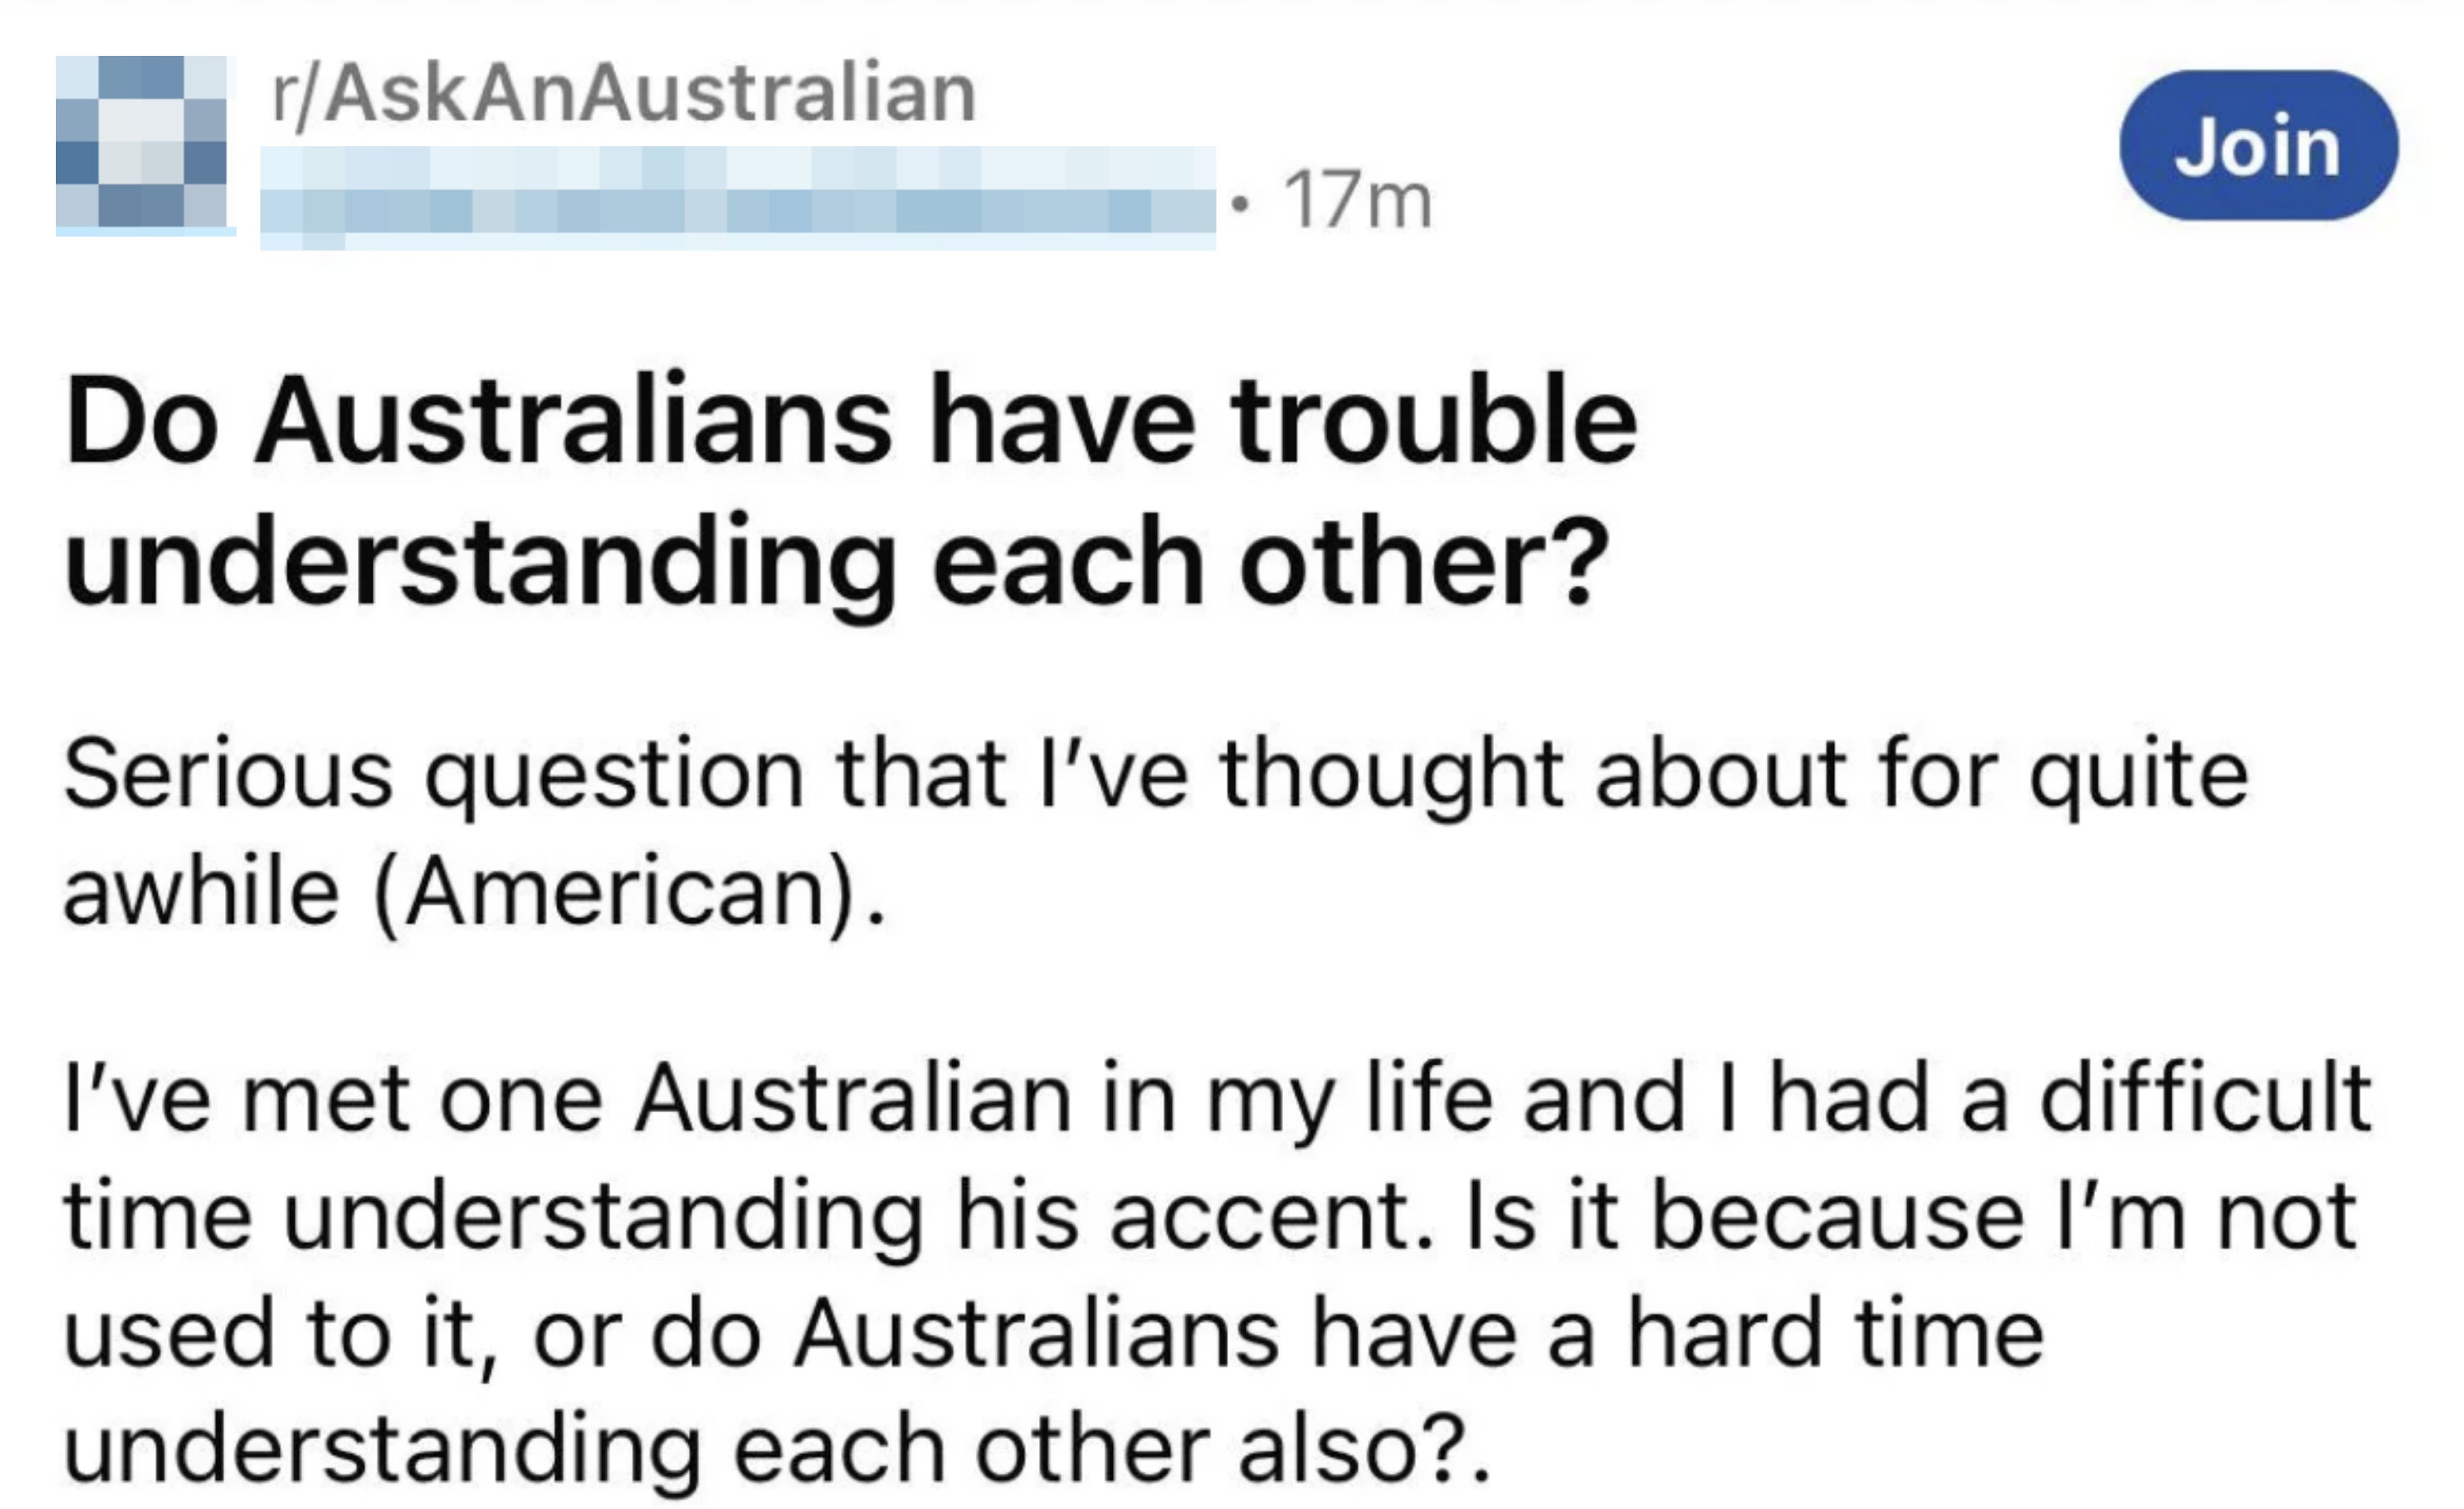 Reddit post asking if Australians have trouble understanding Americans, with a personal anecdote shared